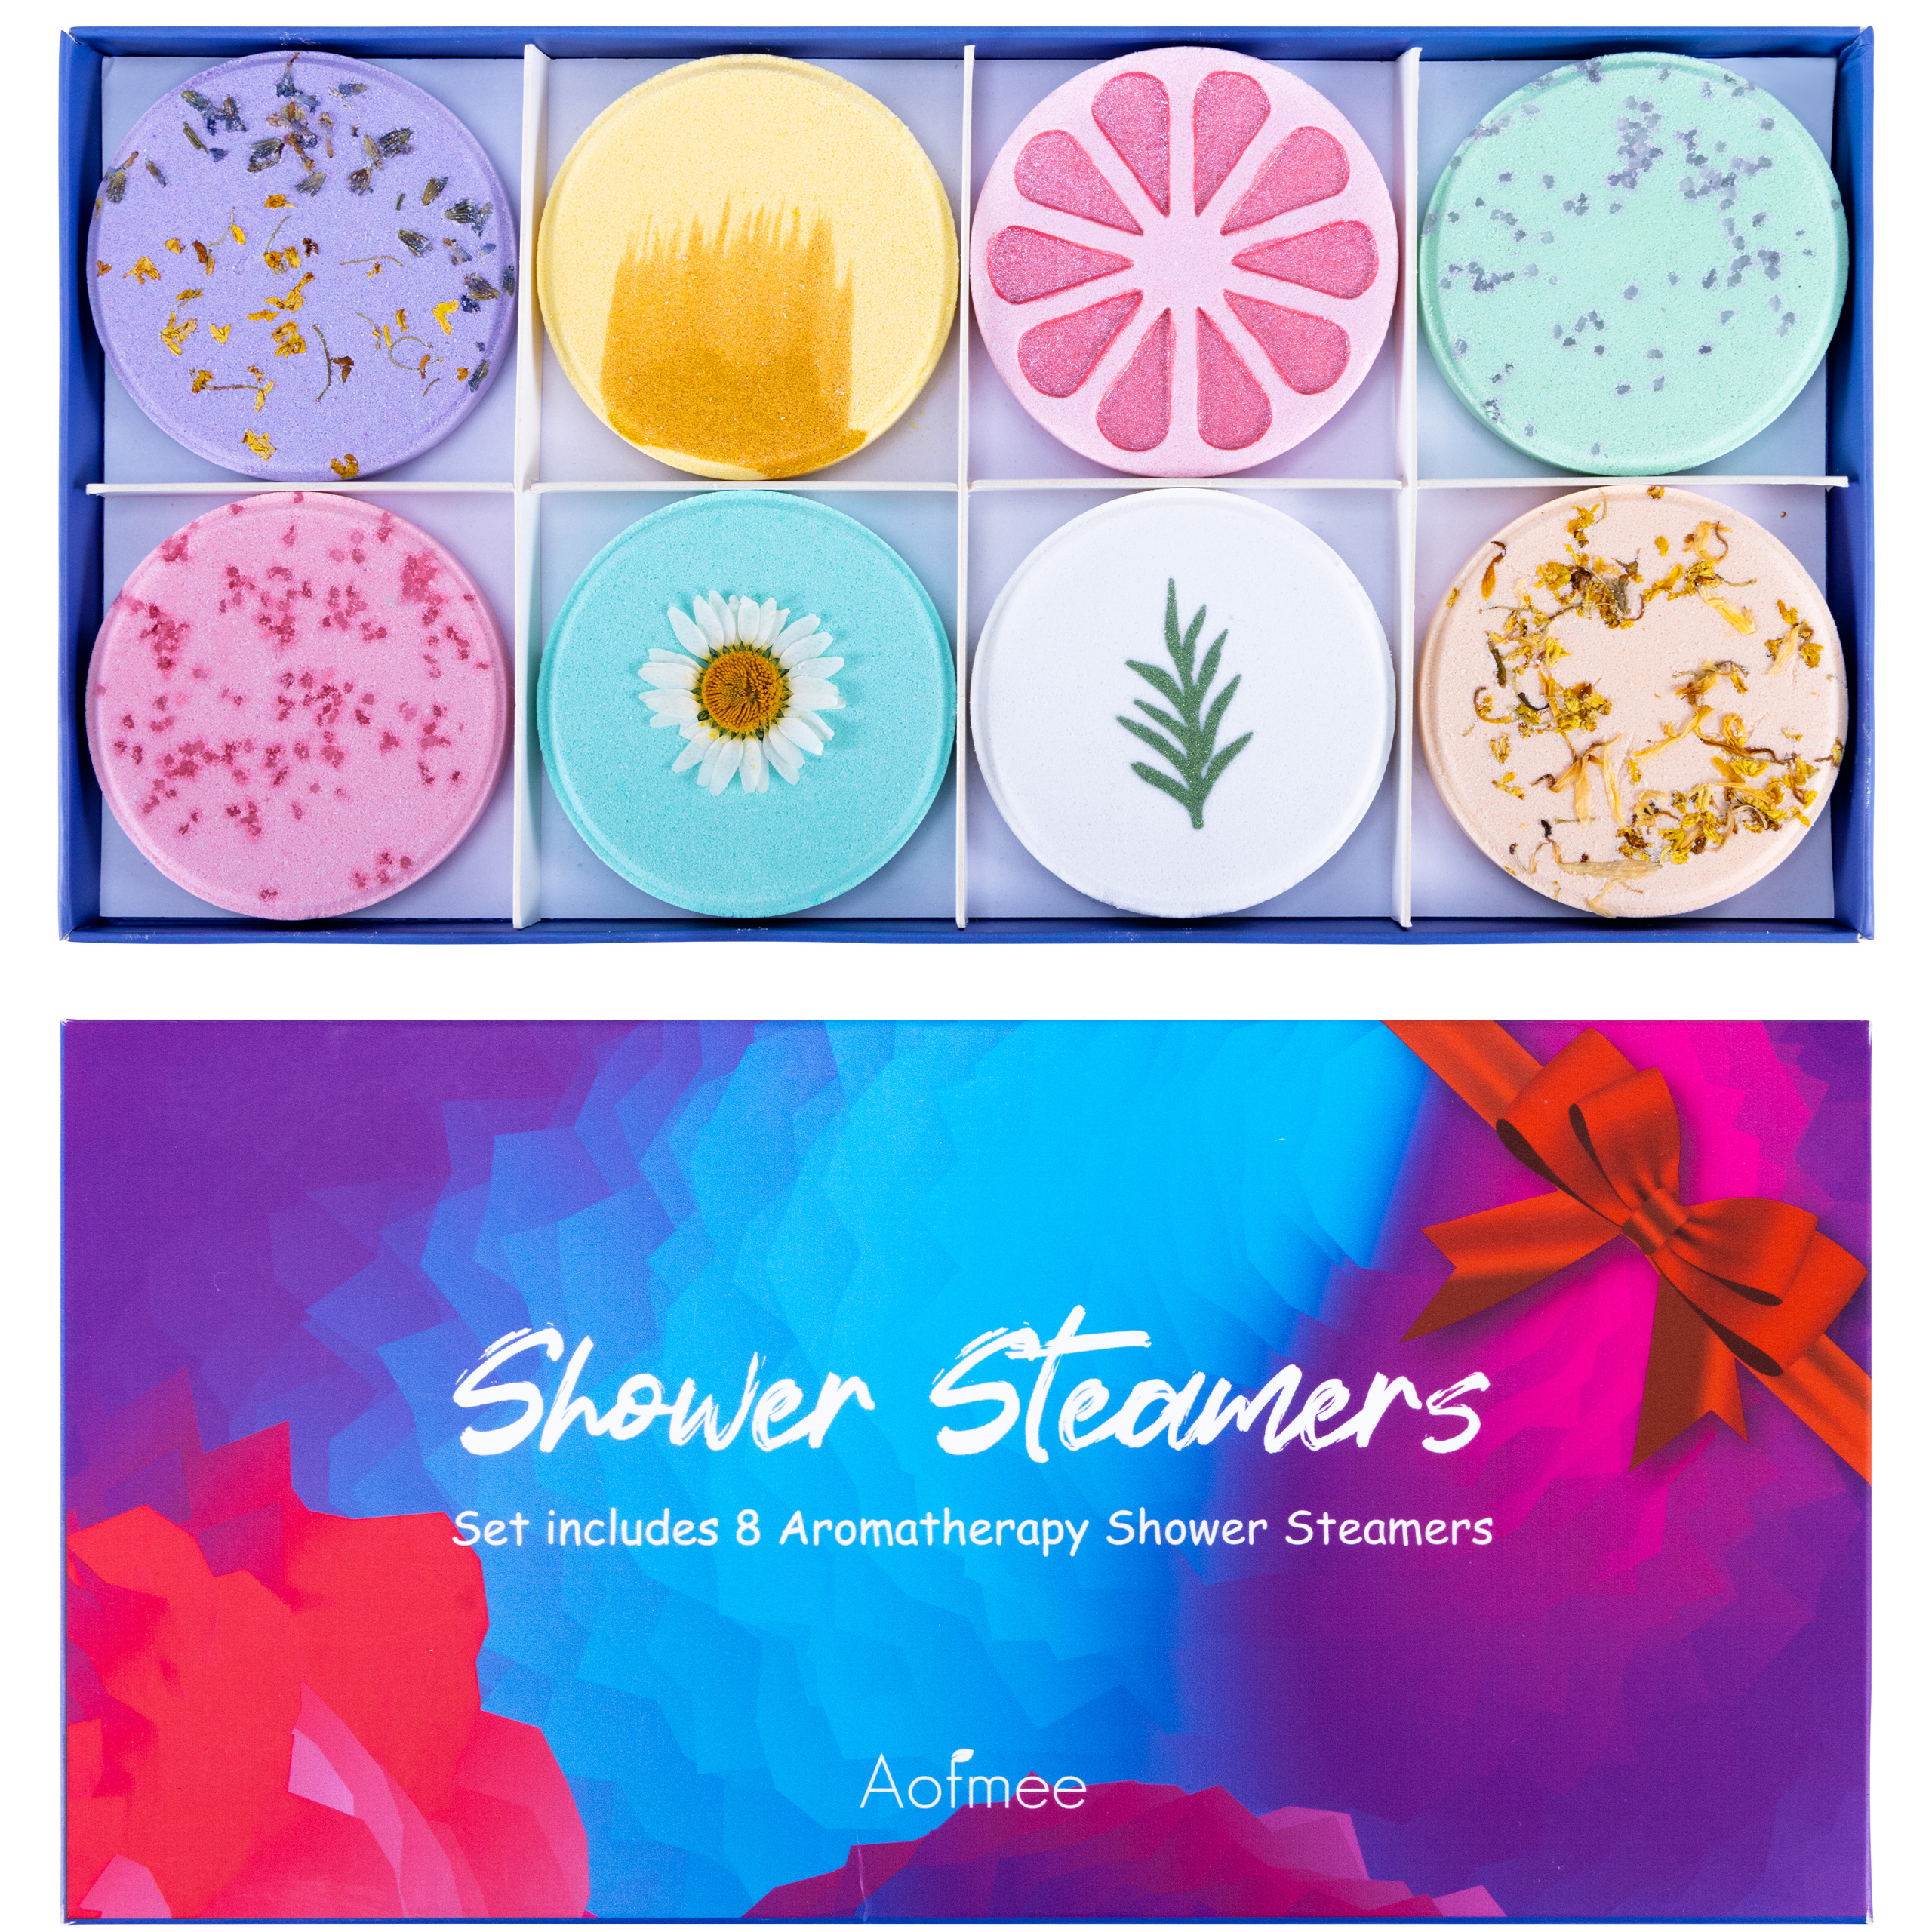 Aofmee Shower Steamers Aromatherapy - Pack of 8 Shower Bombs Gift Set, Shower Tablets with Essential Oils for Relaxation, Self Care Gifts Spa Gifts for Women and Men